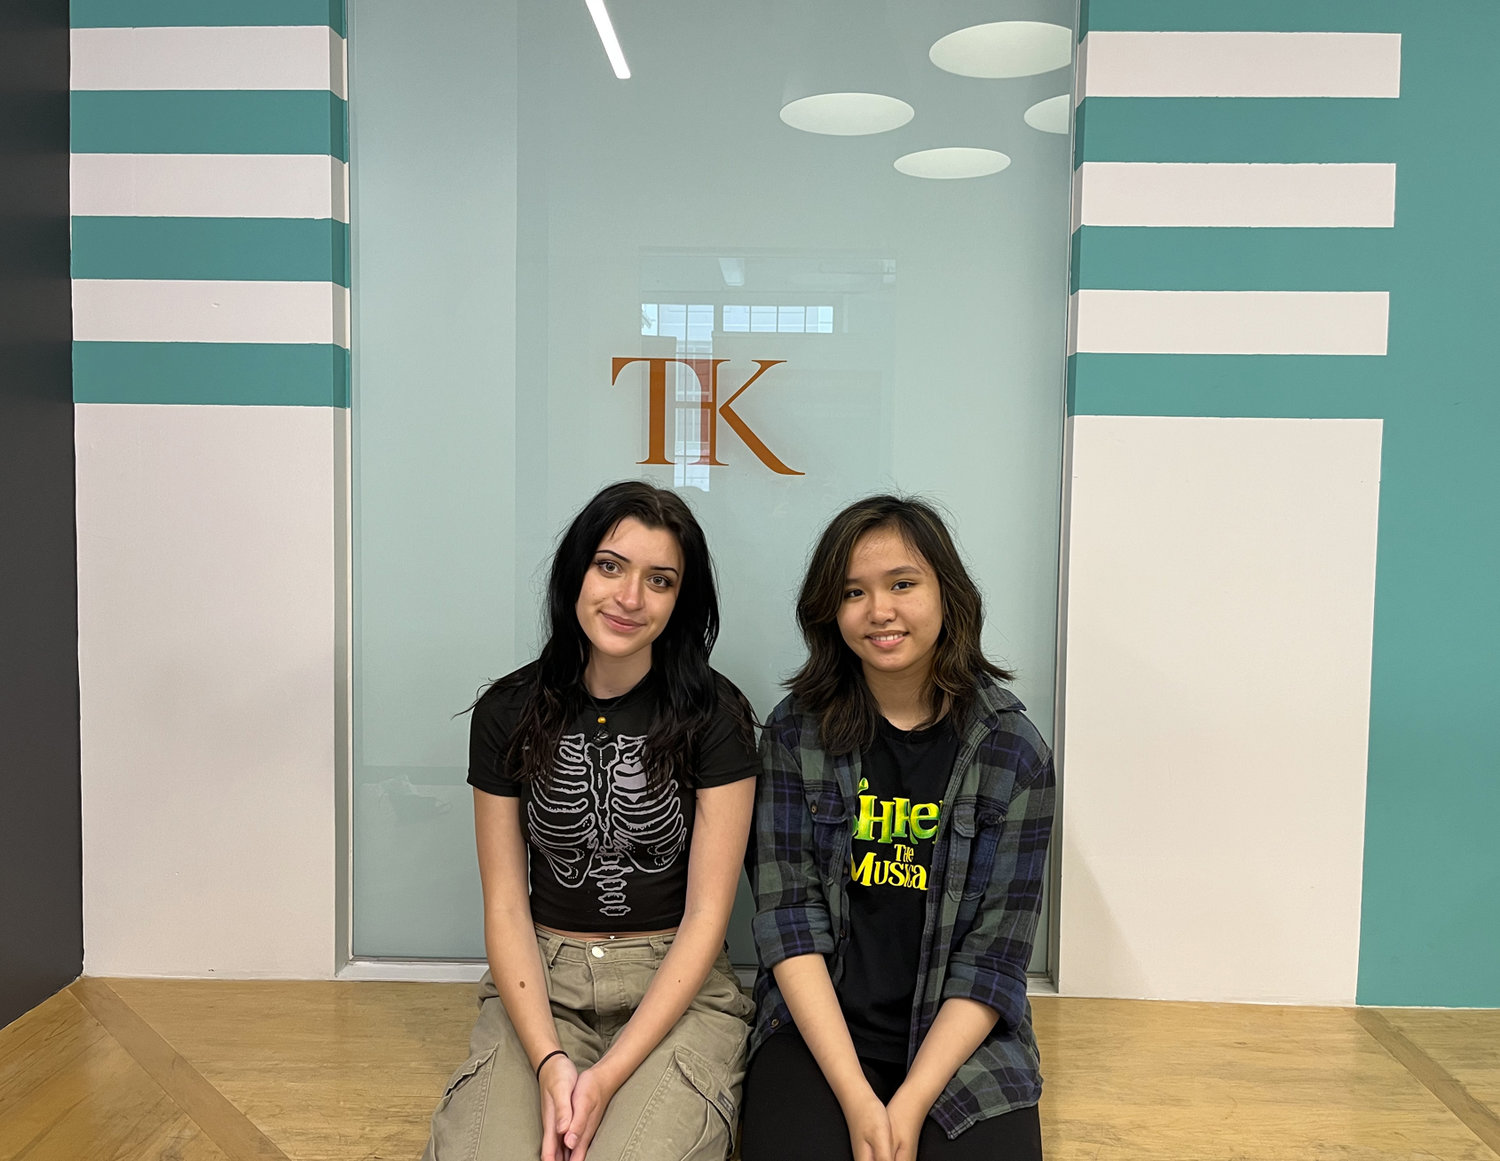 Students Trinity Bokelmann and Leanne Lily Lazo of Lynbrook, right, were among those earning acting scholarships to the Terry Knickerbocker Studio.